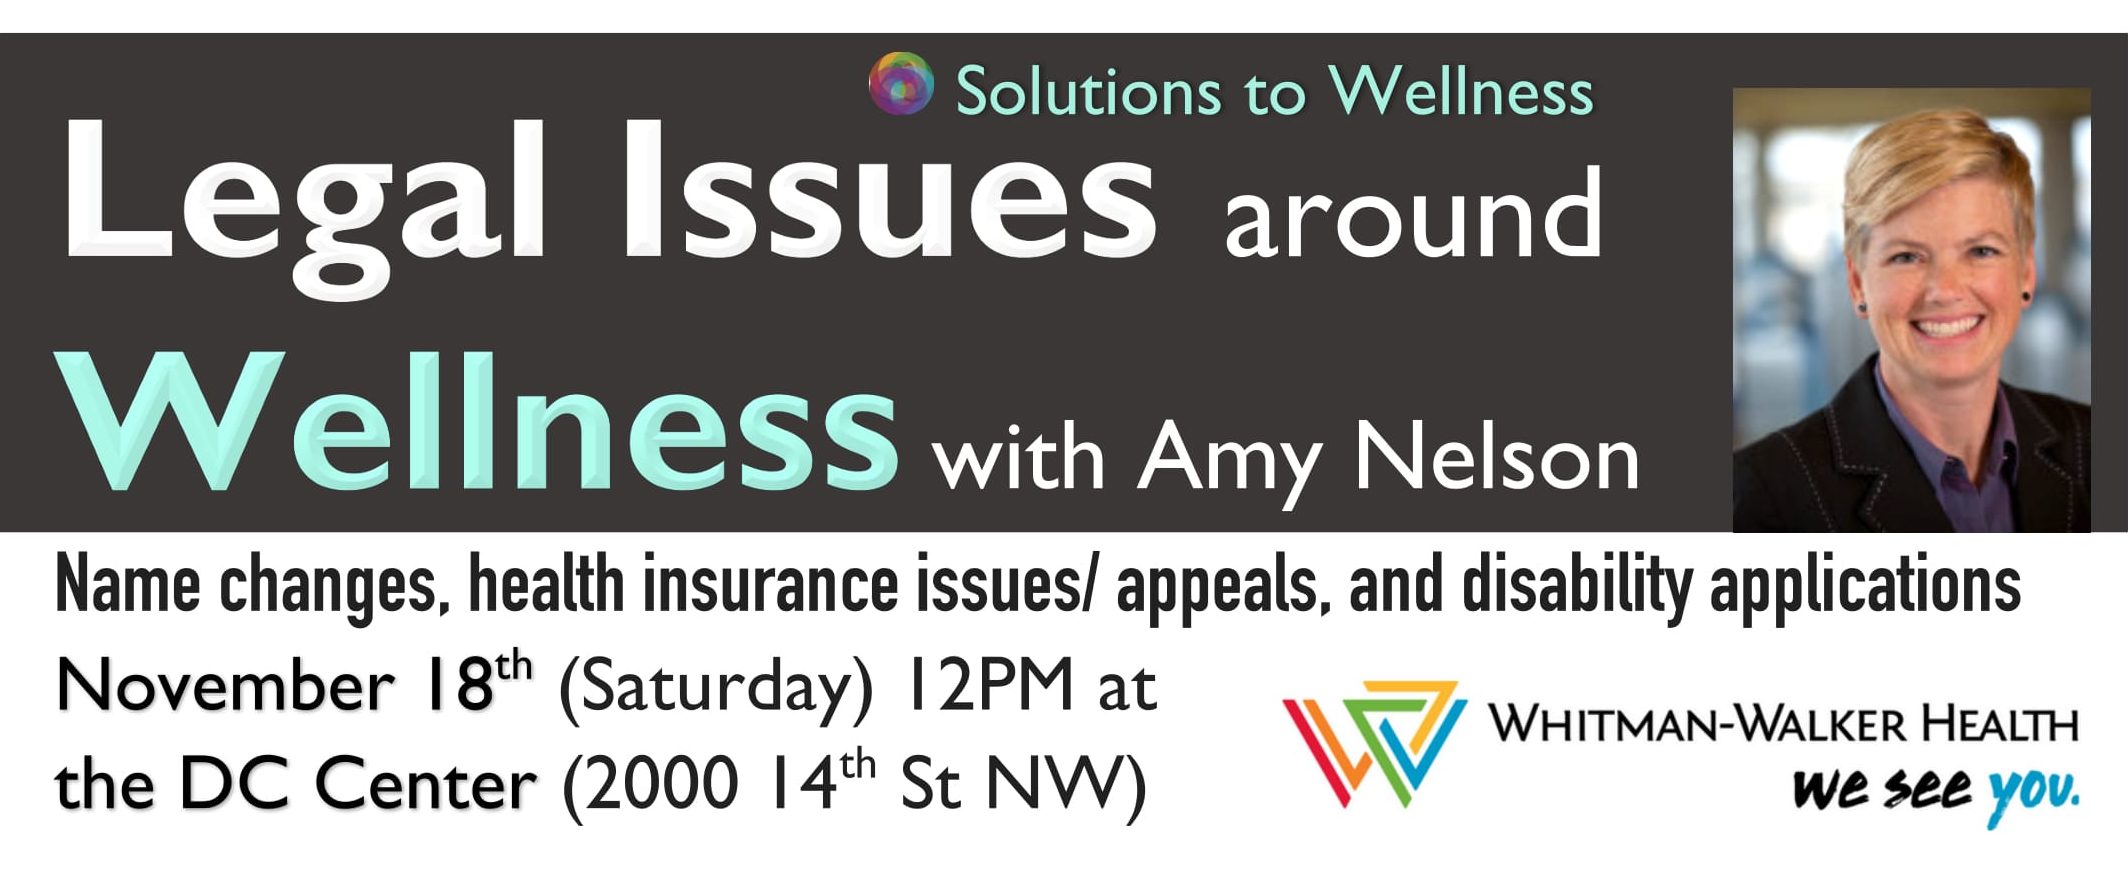 Legal Issues around Wellness with Whitman-Walker Health [Solutions to Wellness Conference]